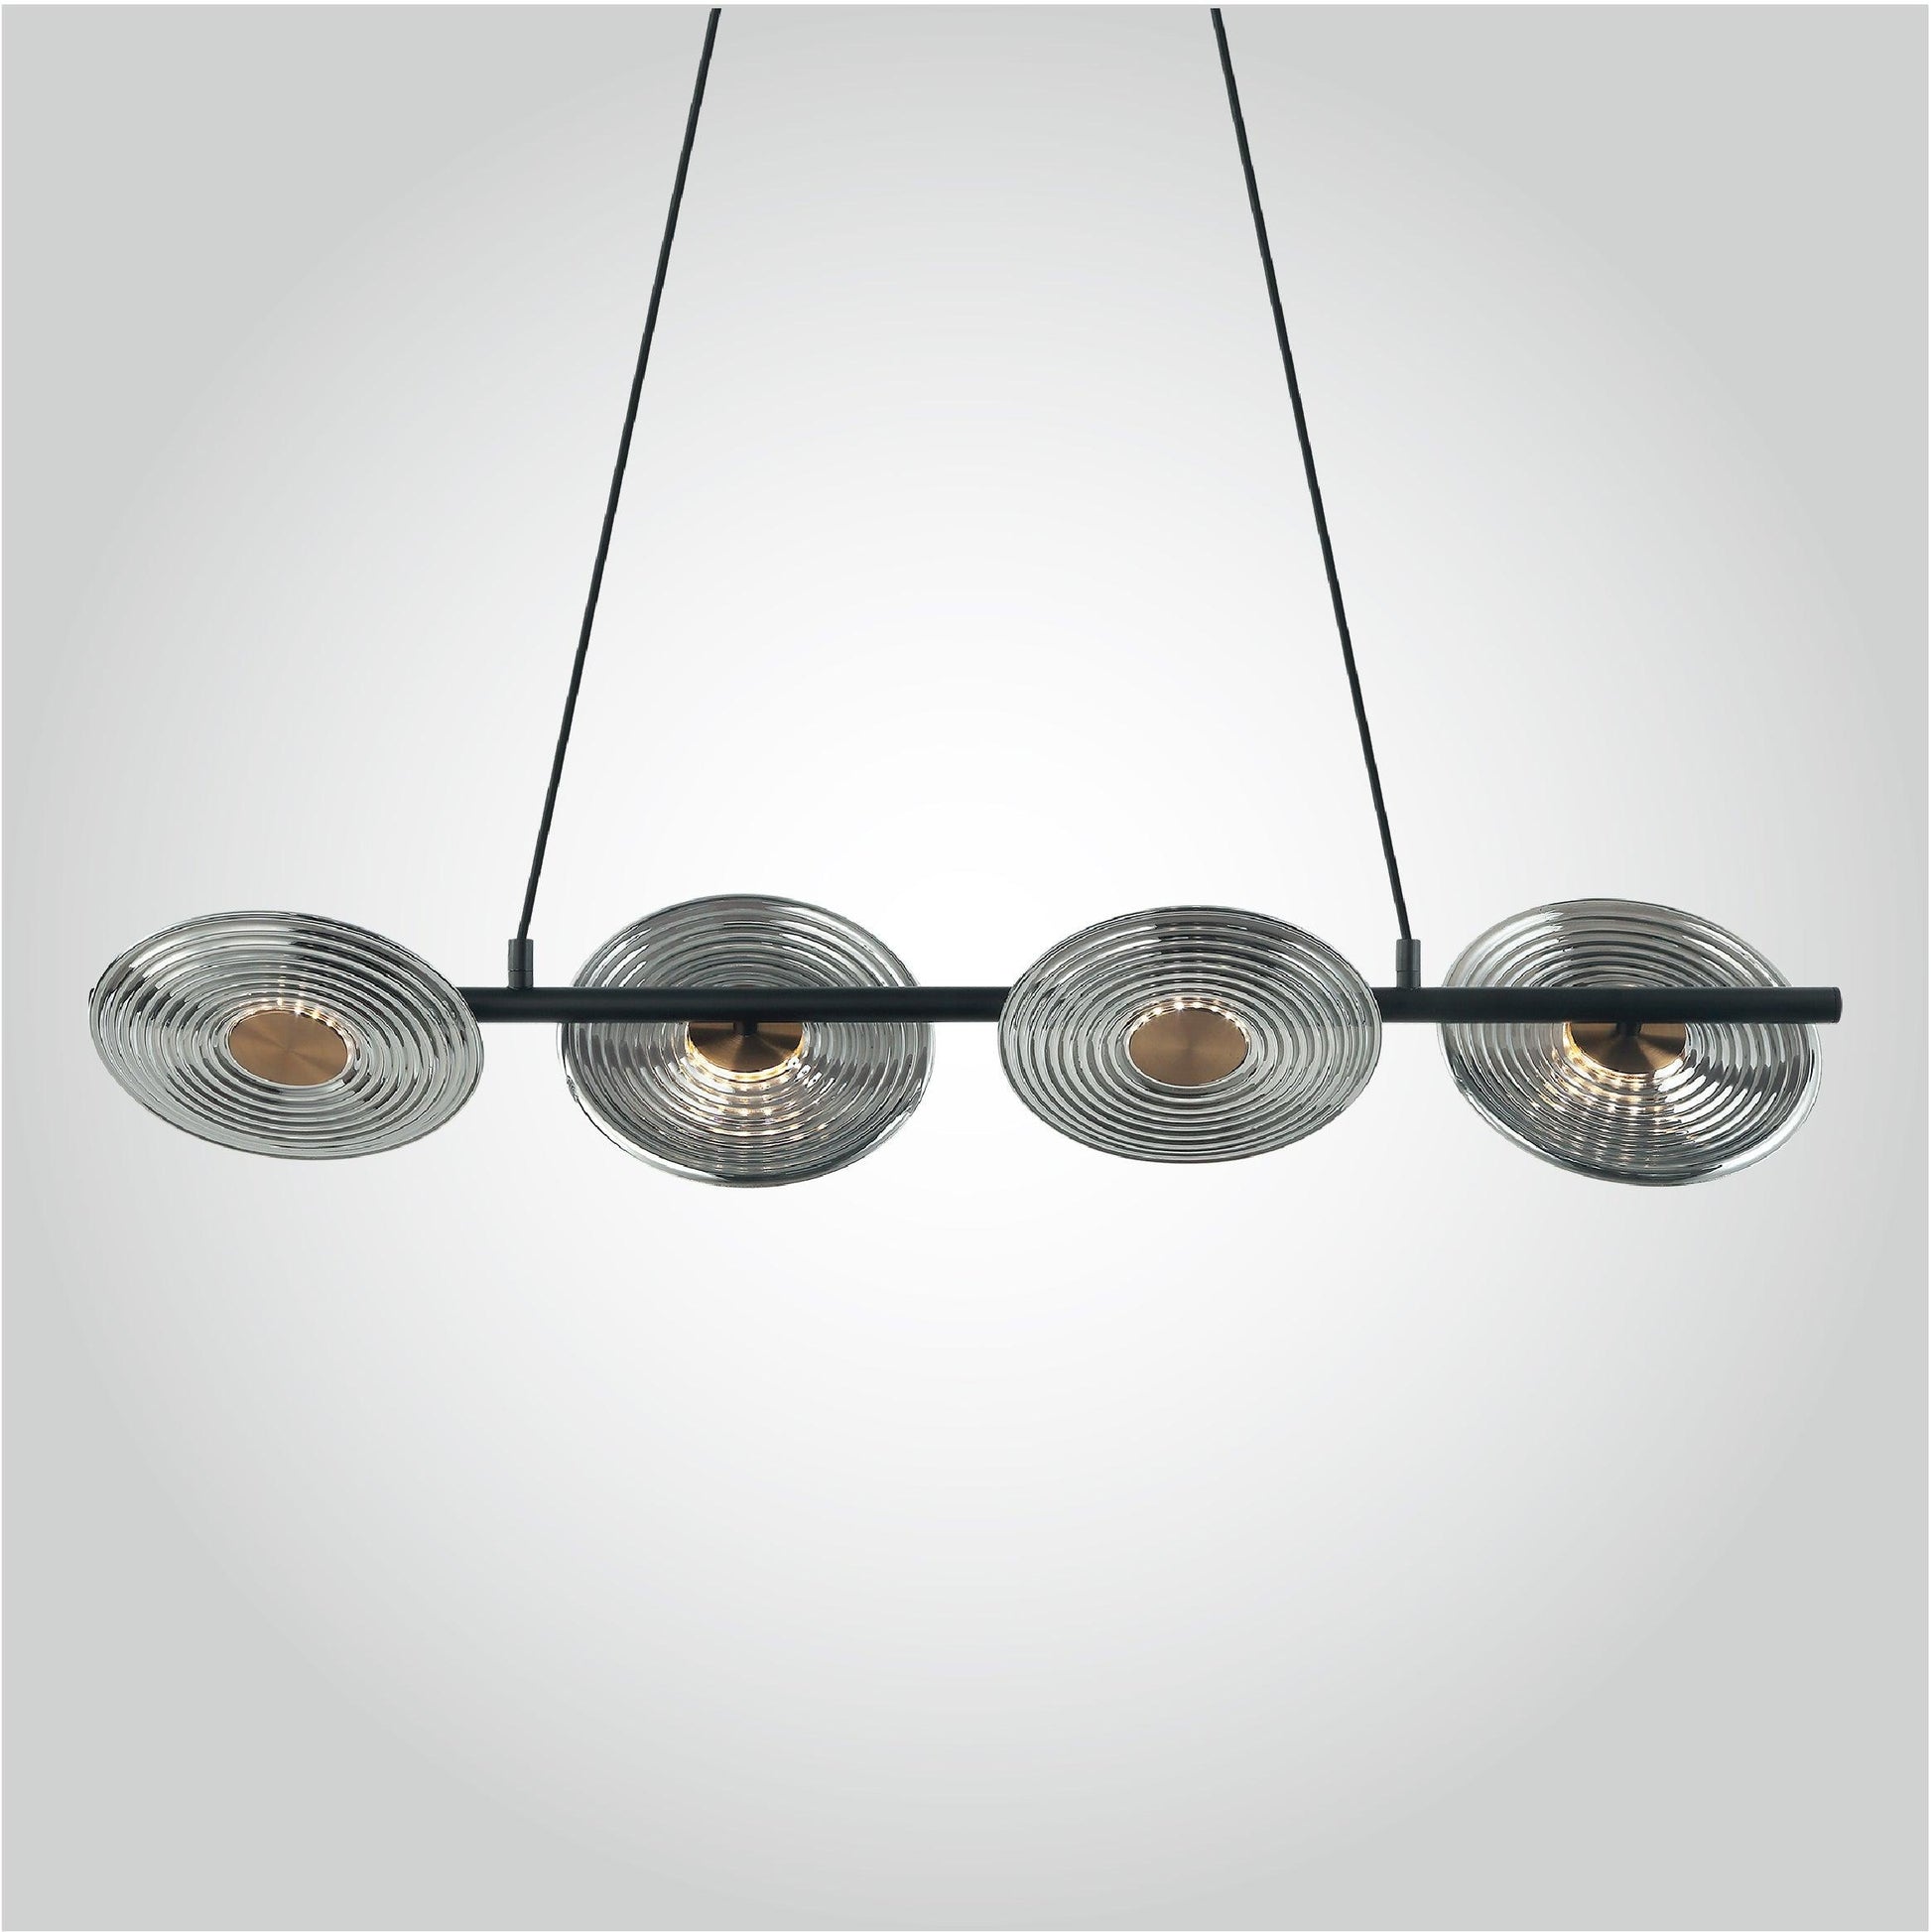 Regal Radiance Ripple Hanging Light by The Light Library